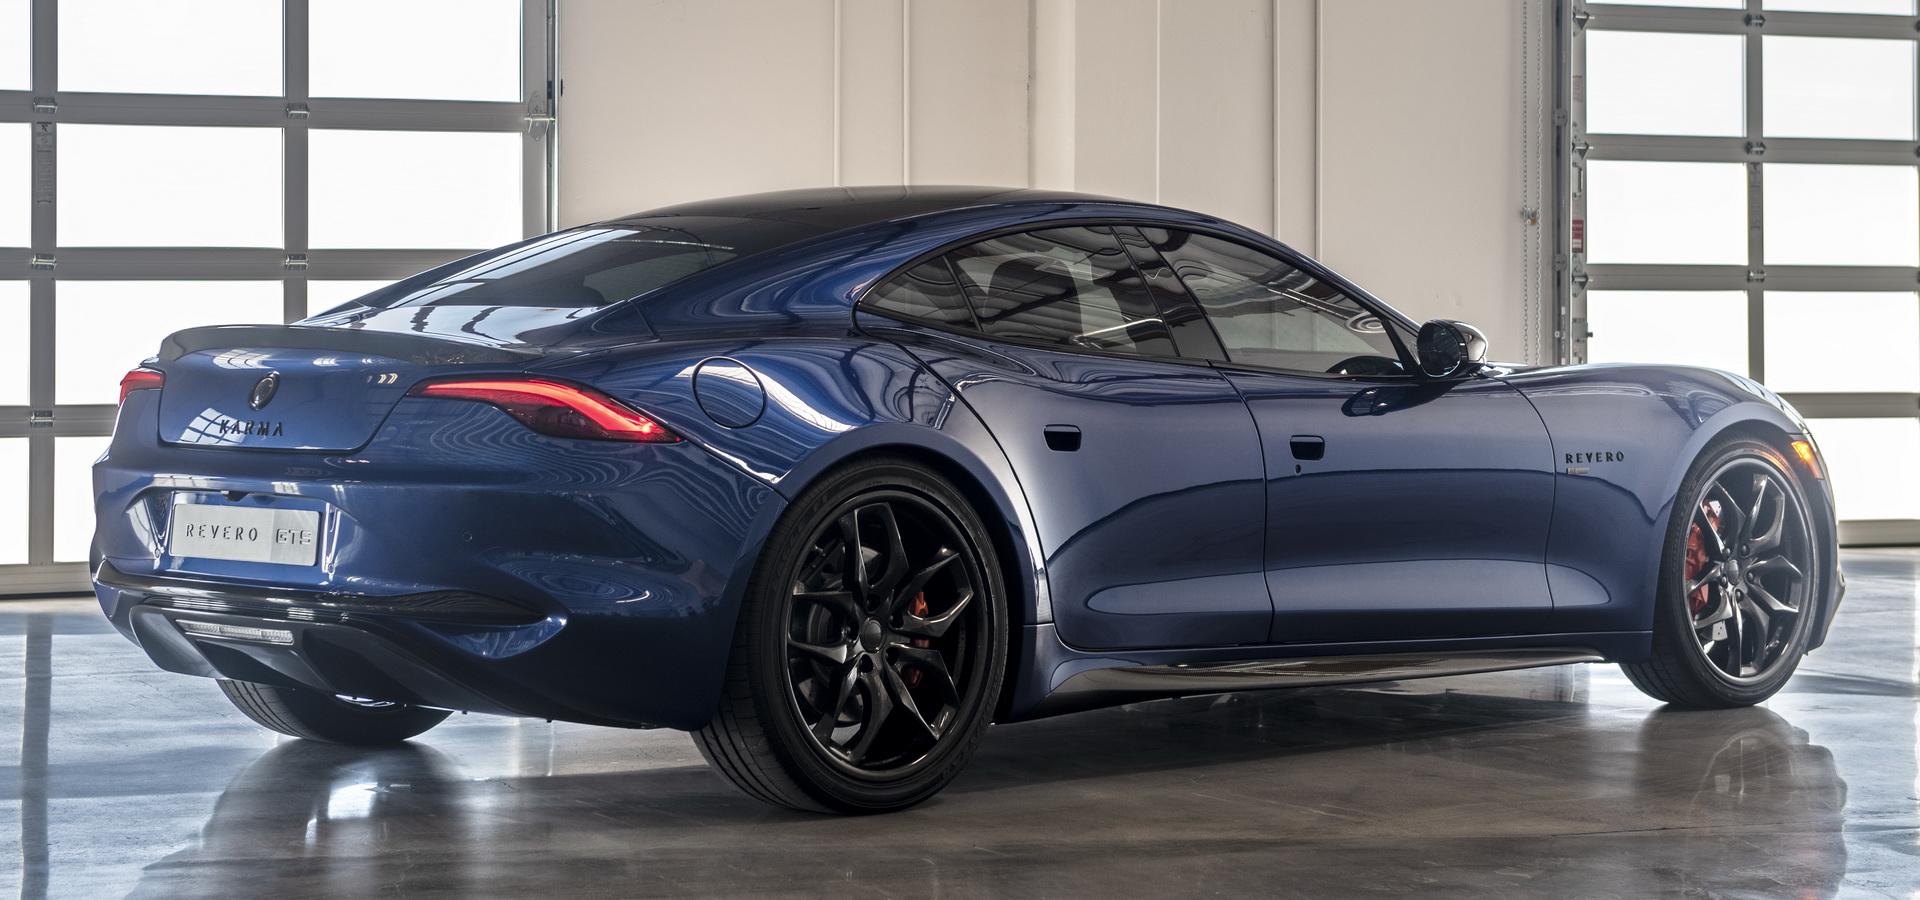 2020 Karma Revero Gts Will Get You To 60 Mph In Under 3 9